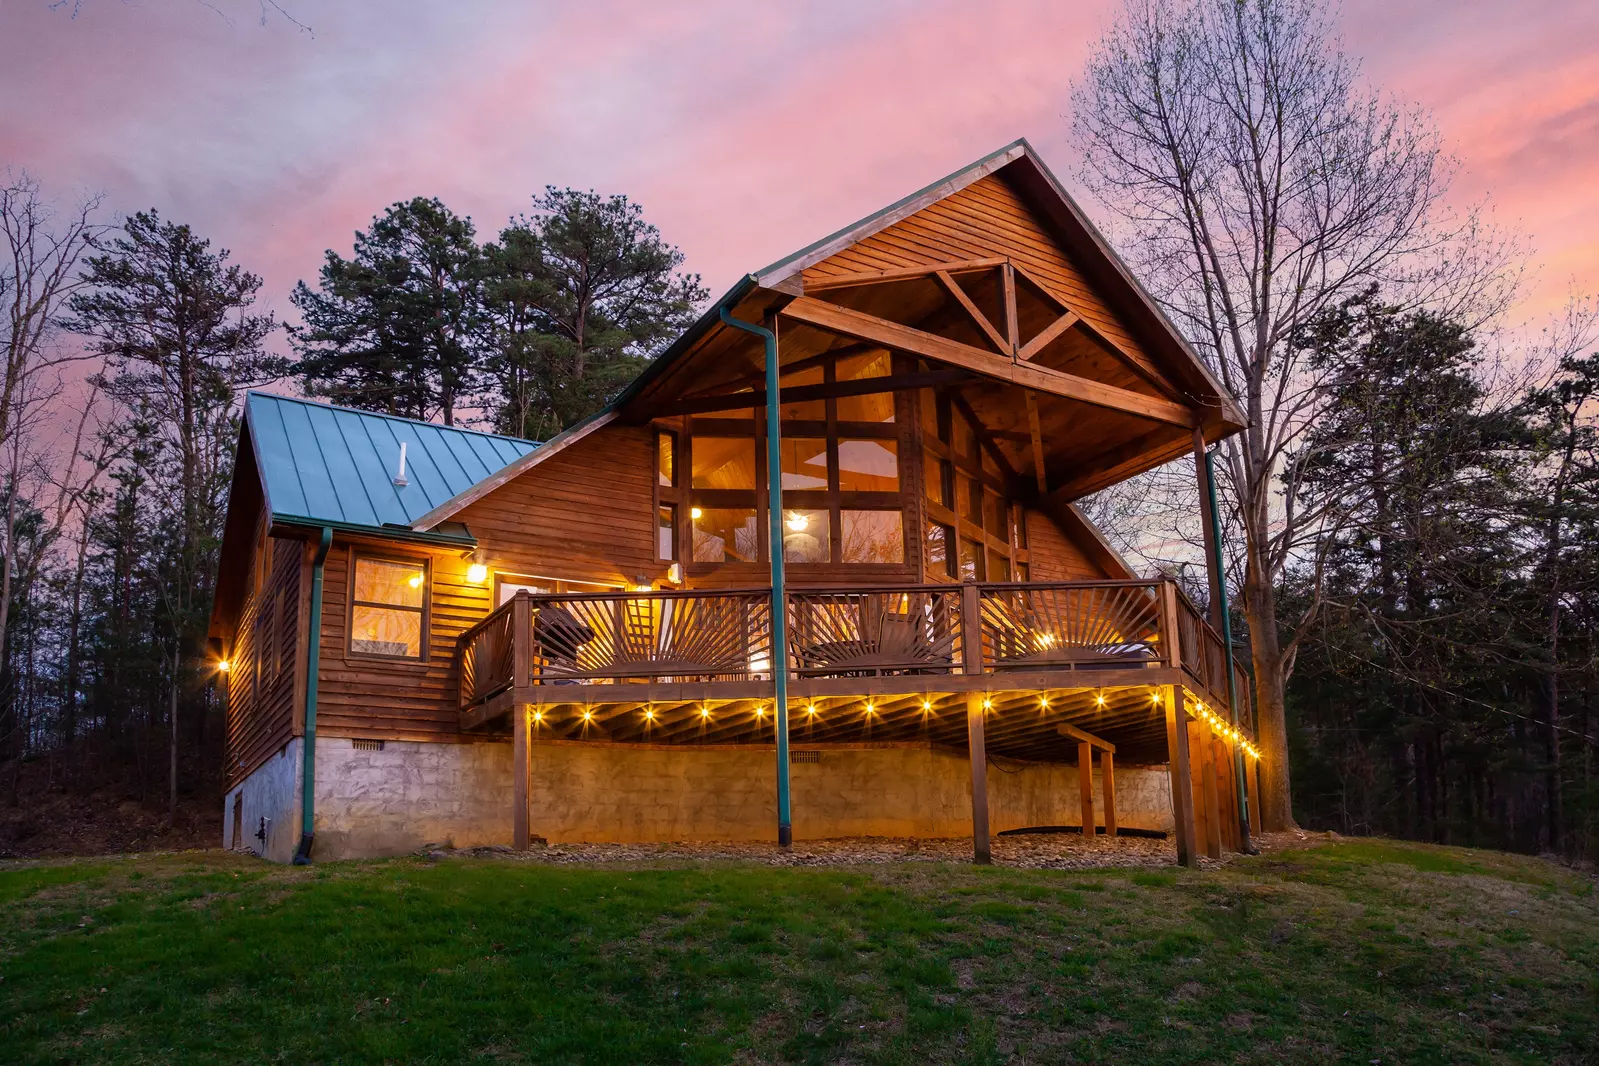 3 bedroom cabin in the Smoky Mountains